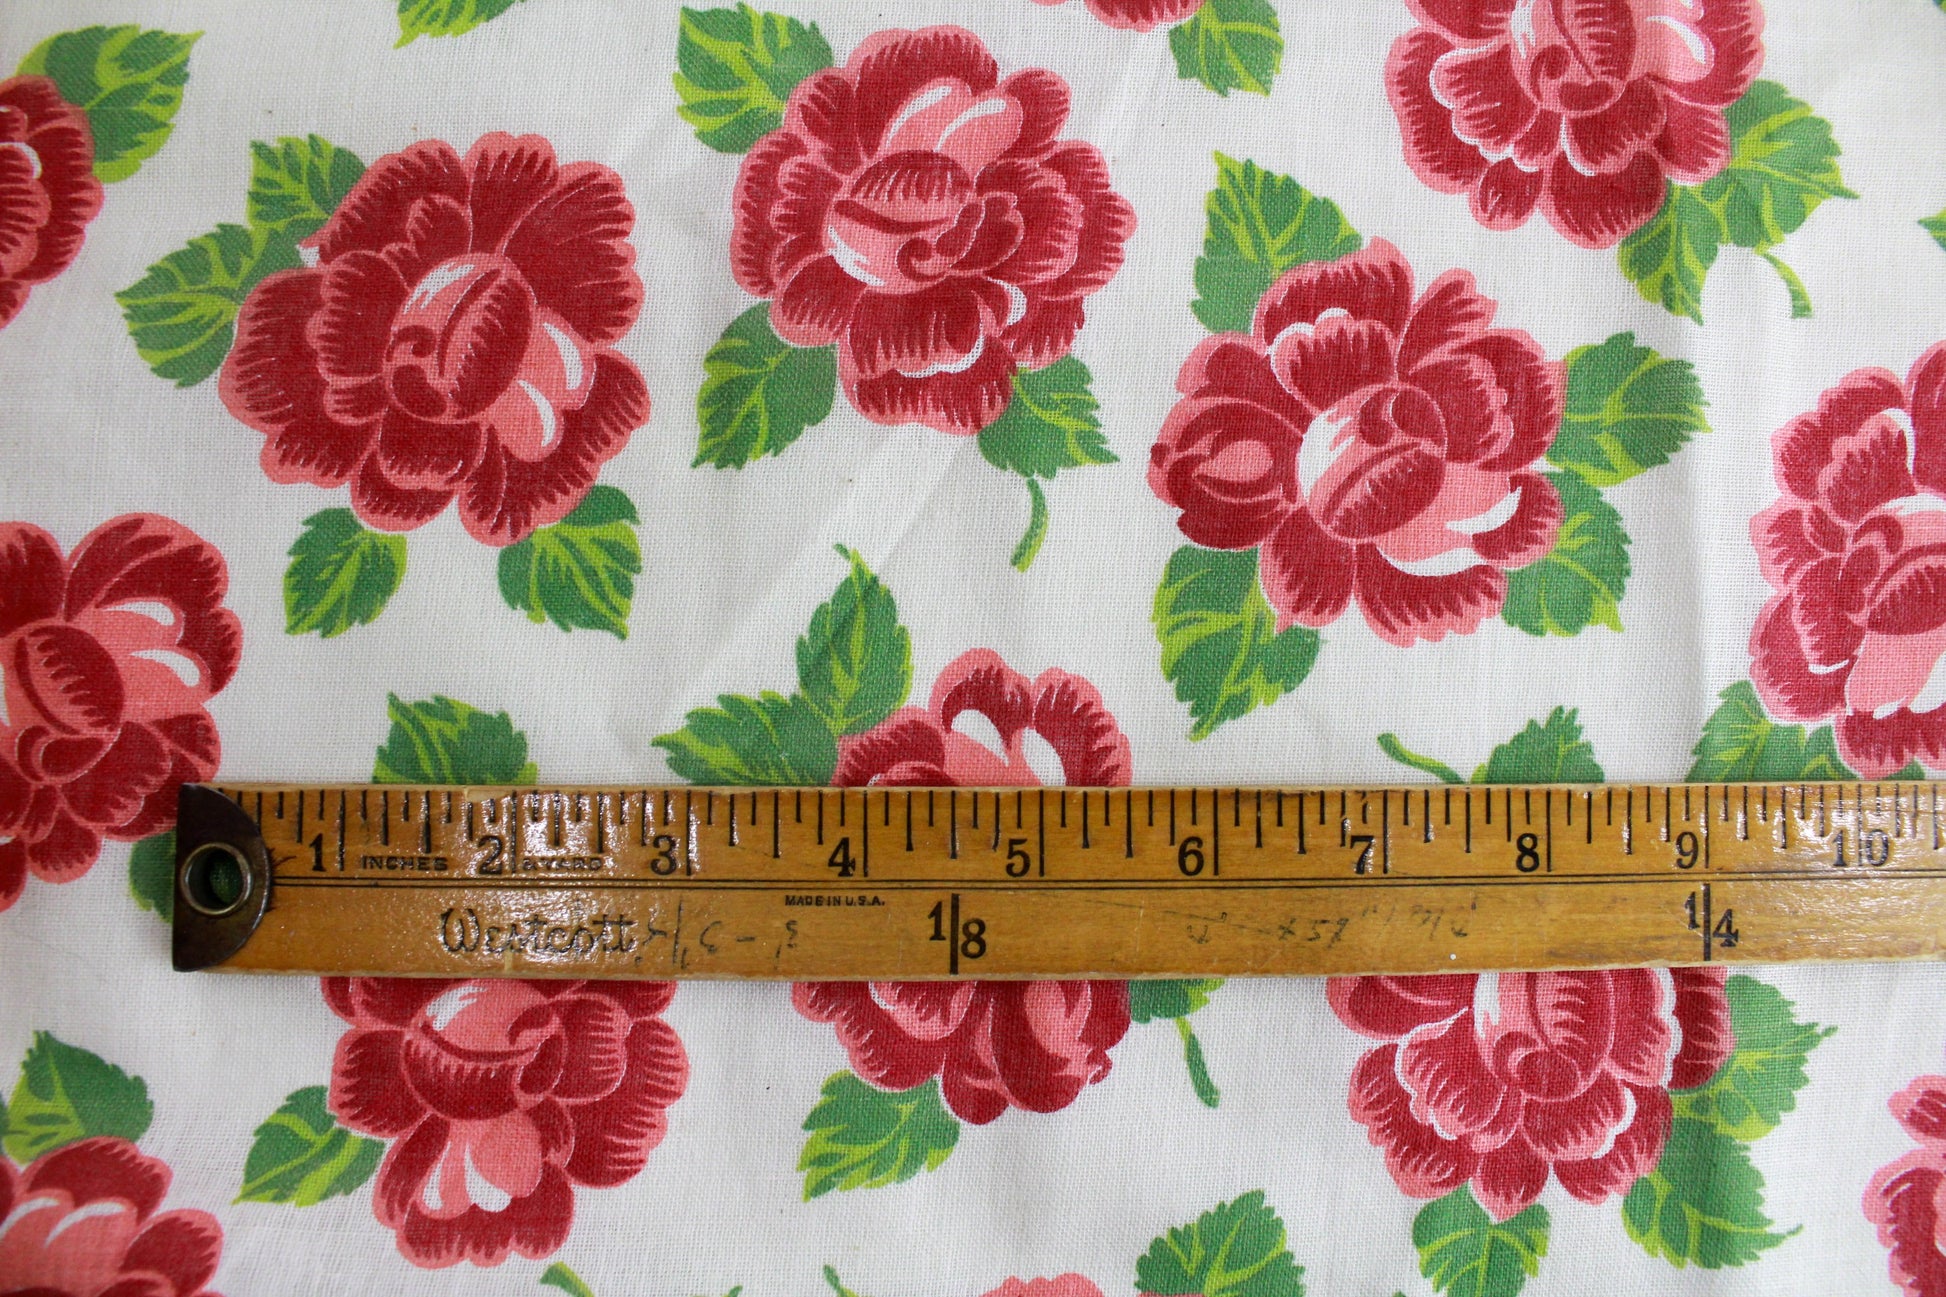 1940s/50s Rose Floral Printed Cotton Fabric, 5 Yards, Vintage Rose